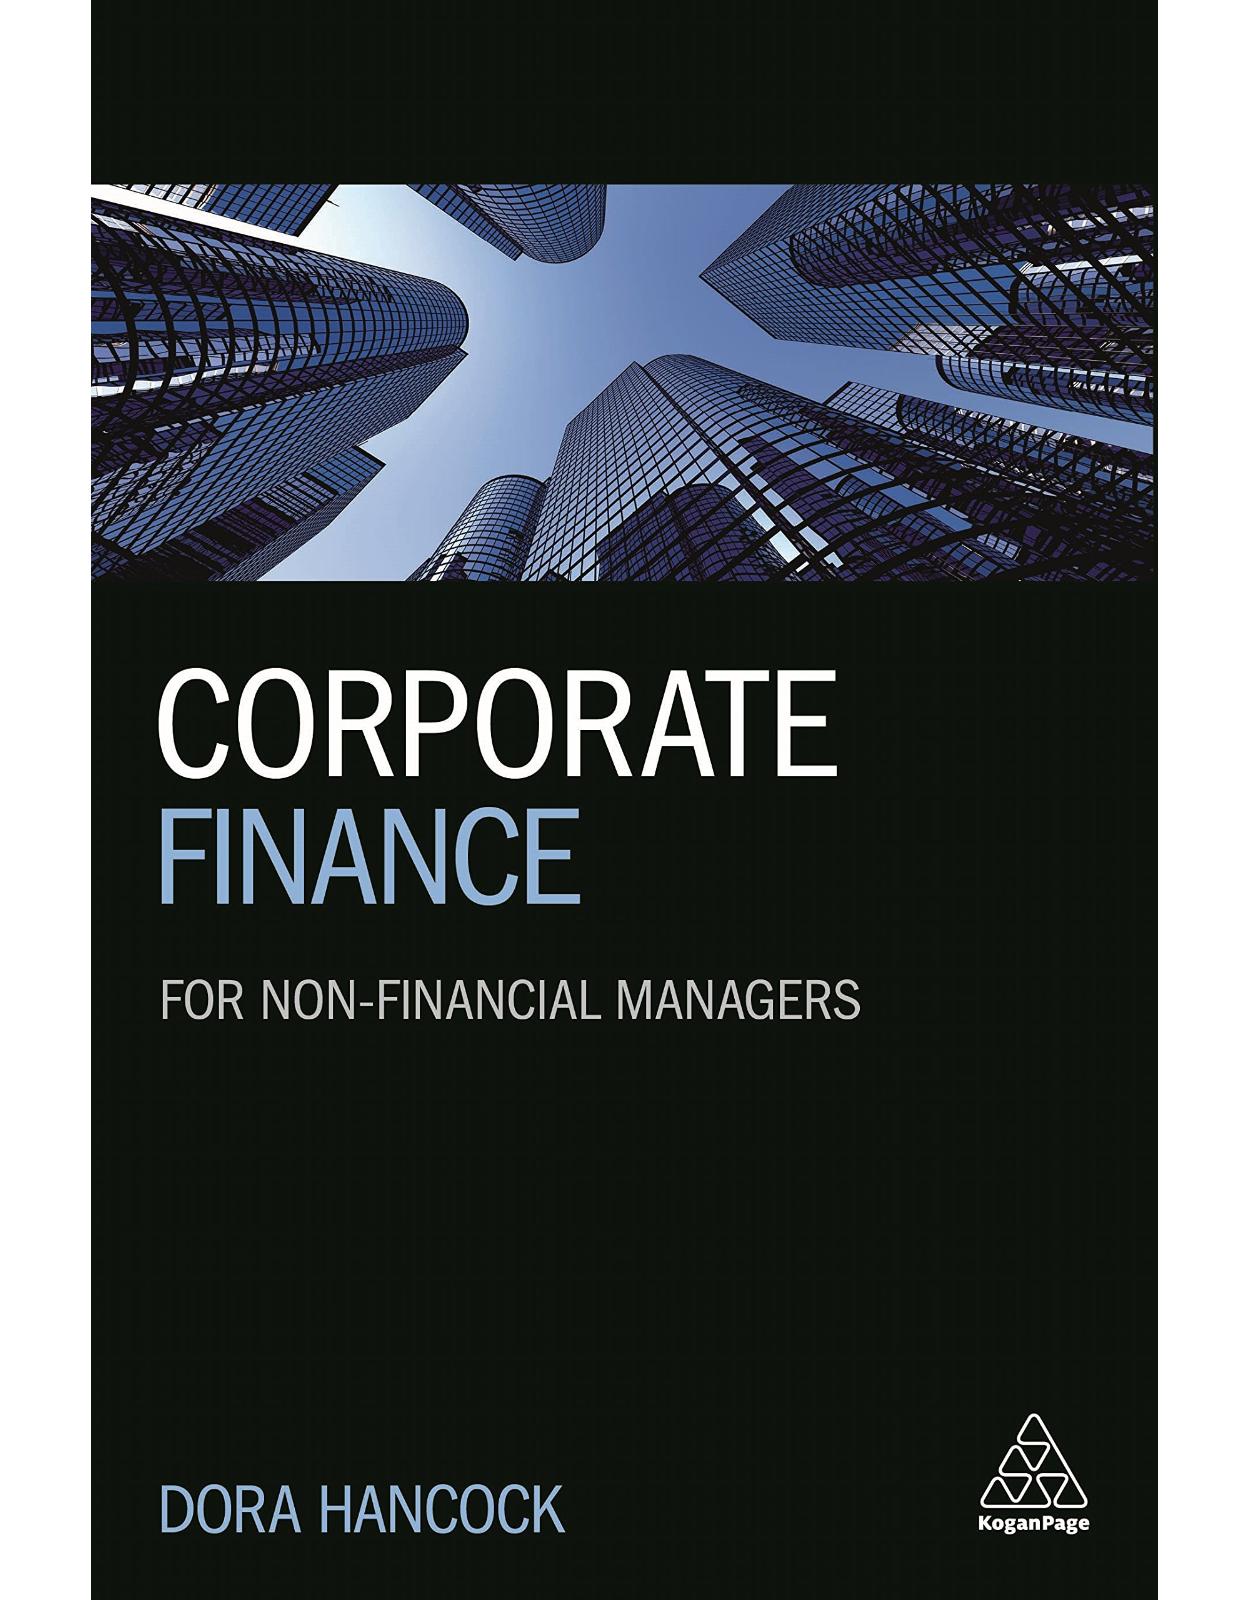 Corporate Finance: For Non-Financial Managers